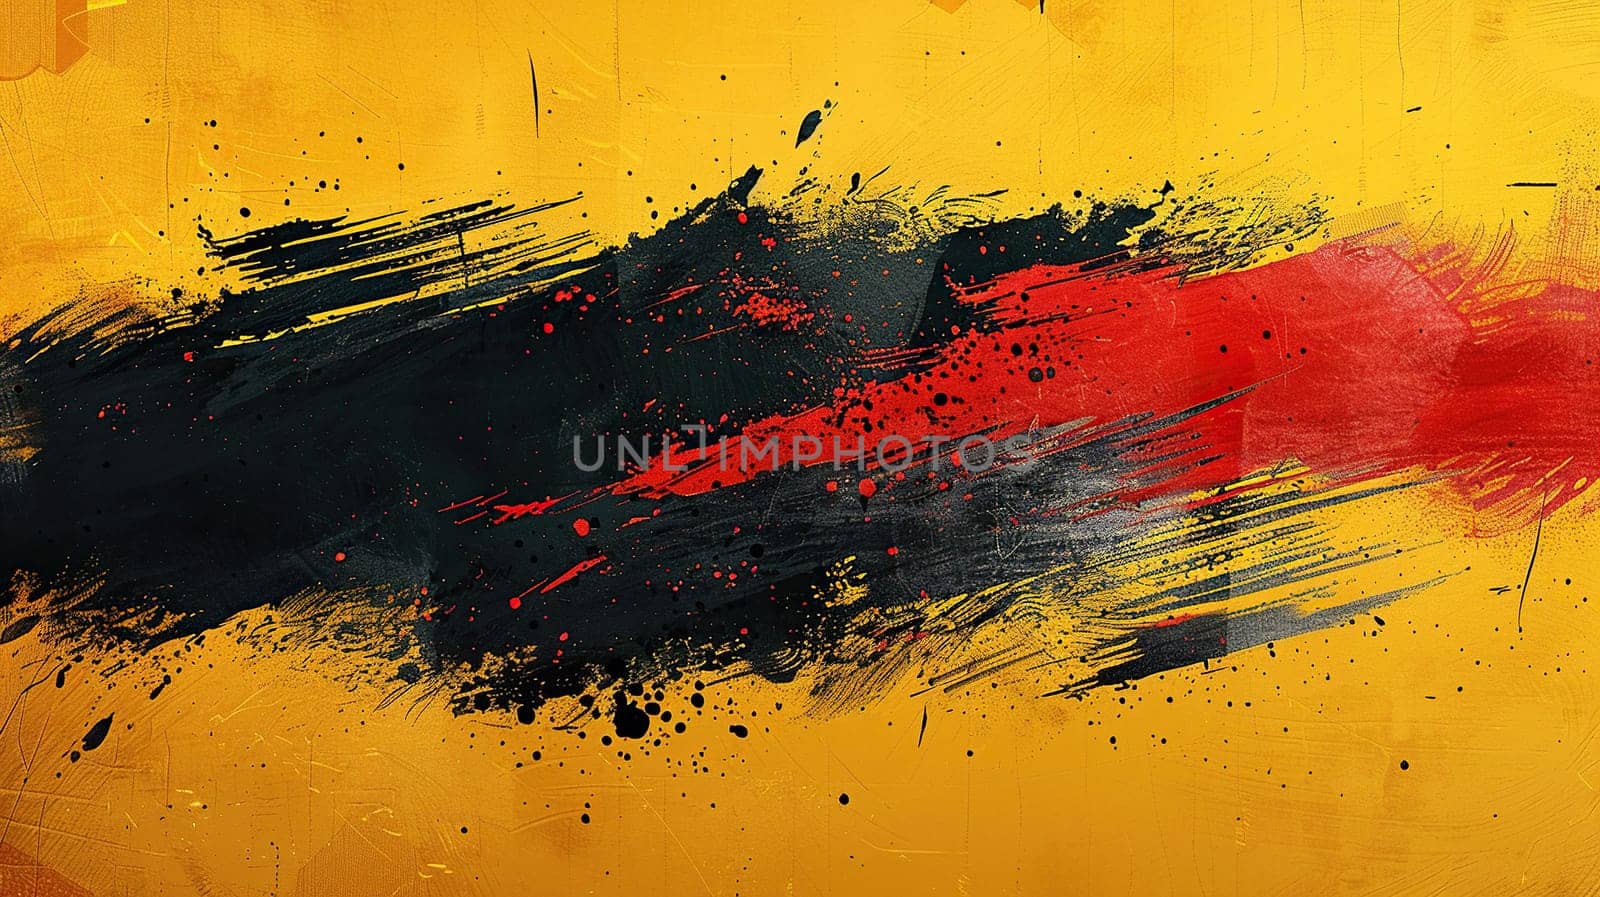 Abstract empty banner in grunge style. Yellow, black, red colors.